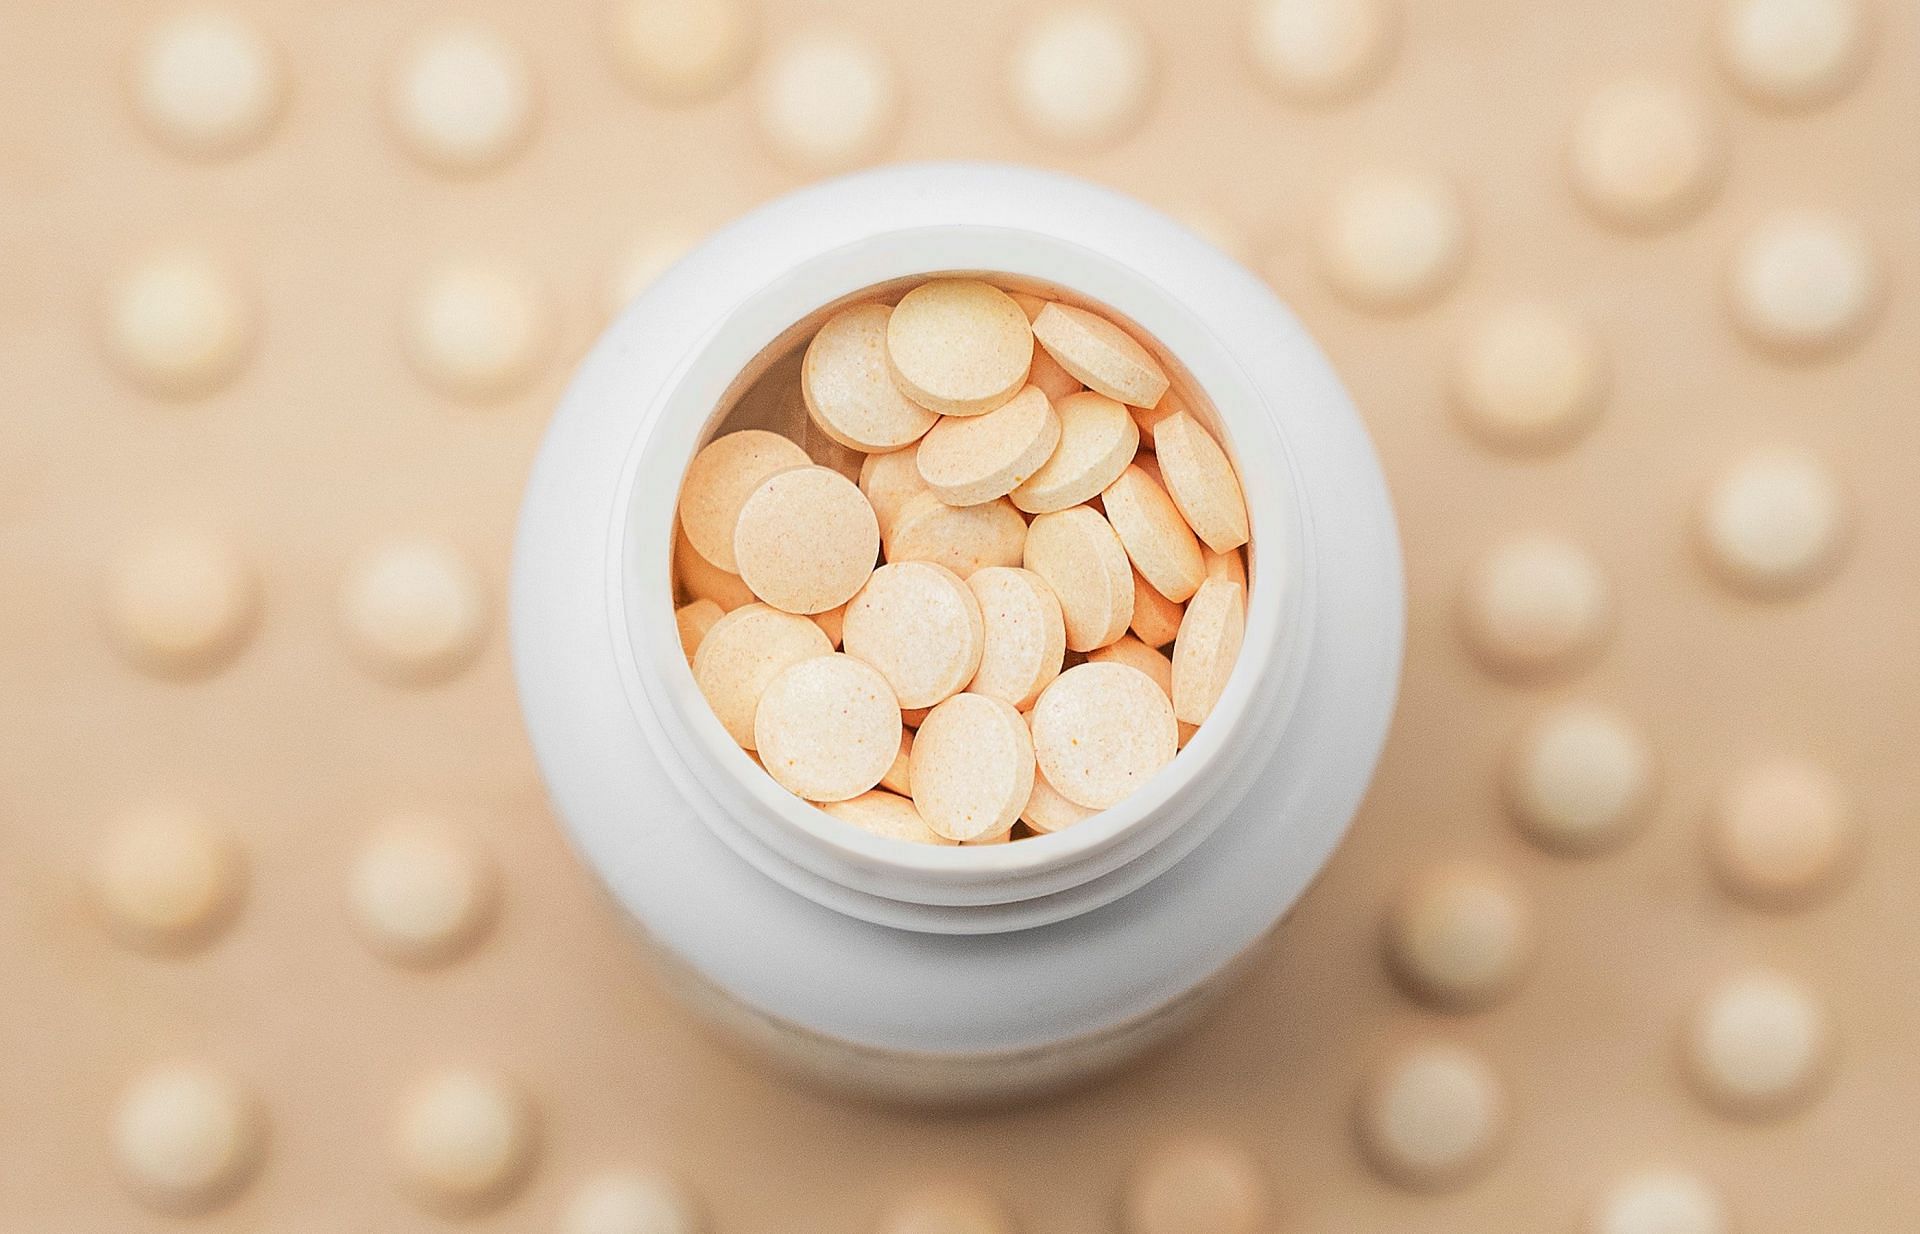 Some of the supplements were found to be labeled incorrectly. (Image via Pexels/Supplements on demand)